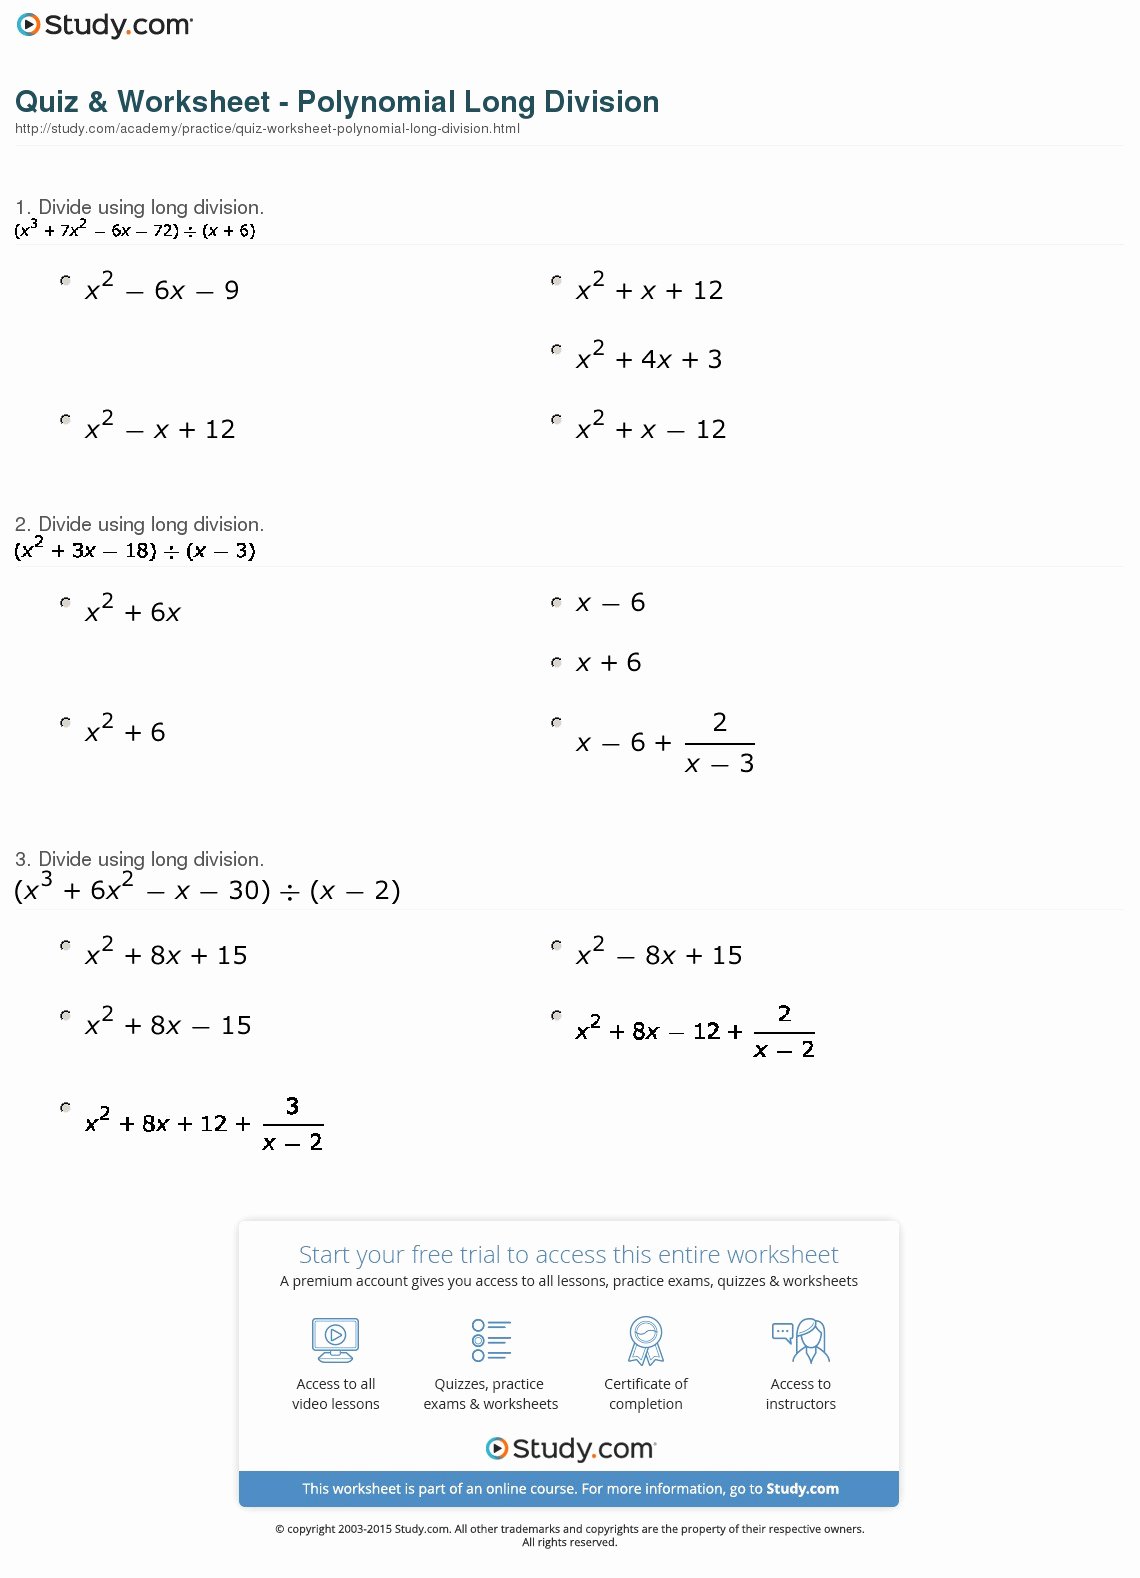 Polynomial Long Division Worksheet Lovely Quiz &amp; Worksheet Polynomial Long Division